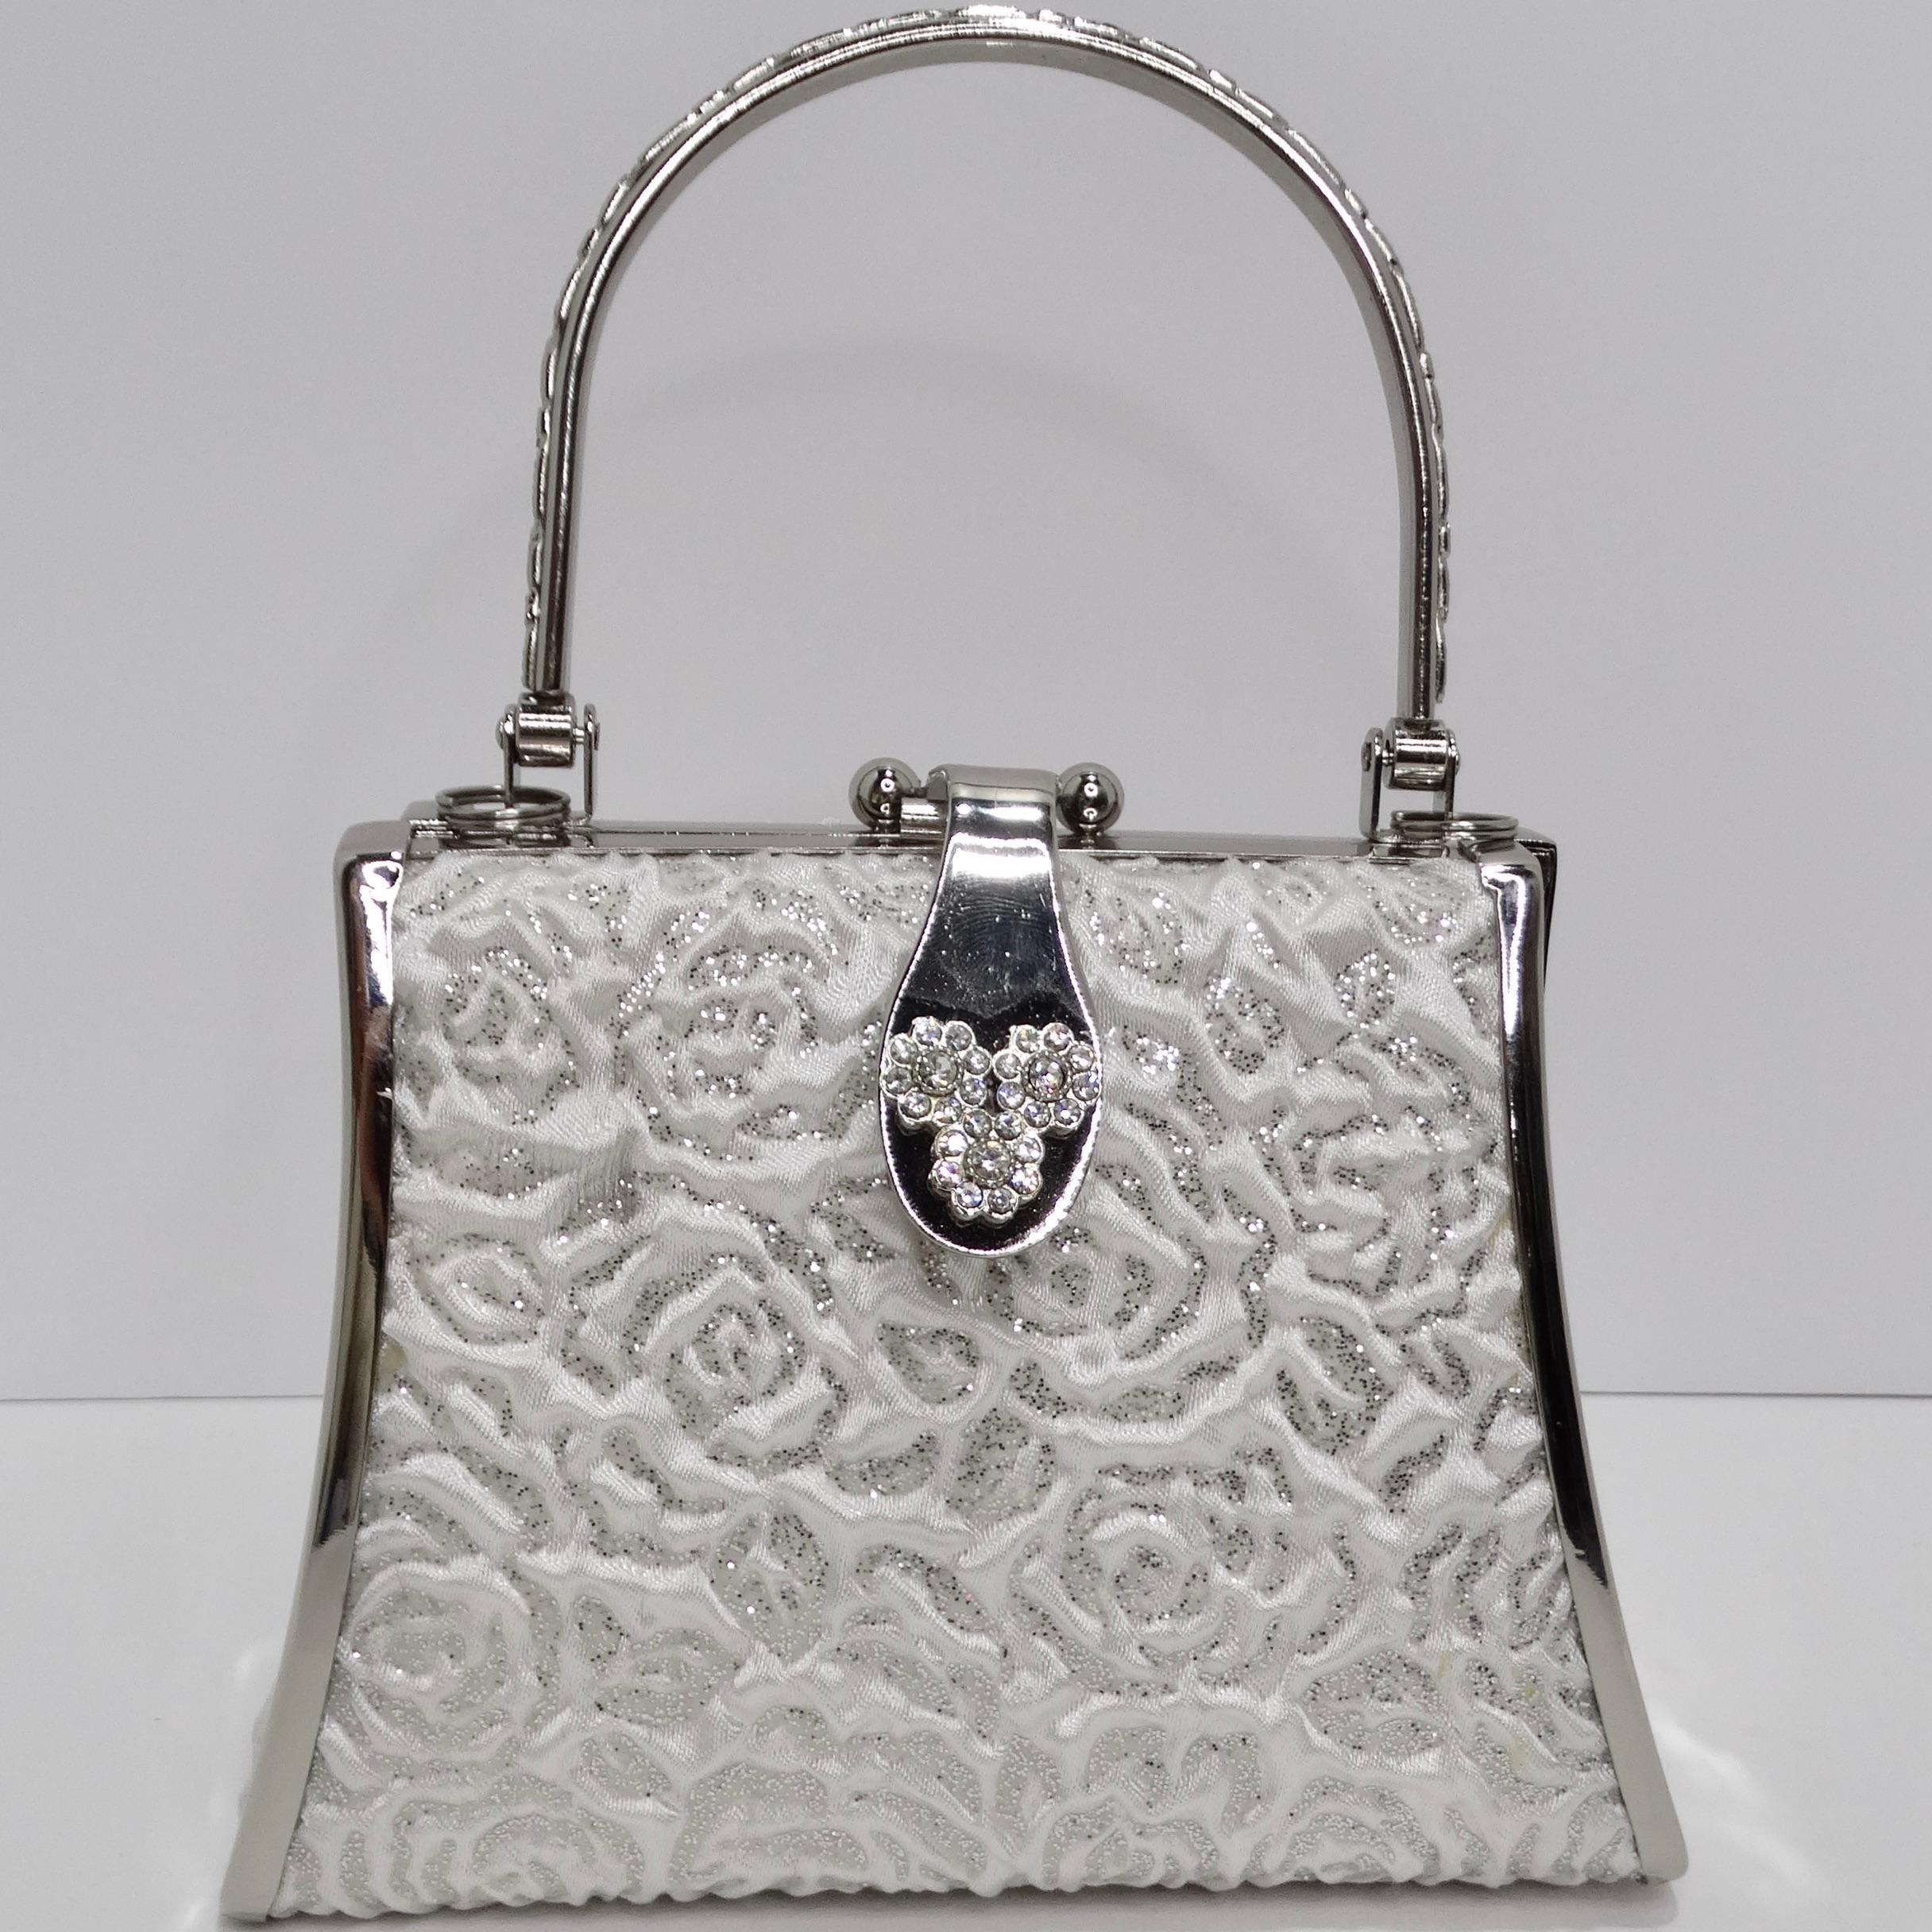 Step back into the glamour of the 1990s with the Colleen Lopez Silver Tone Embroidered Minaudière. This adorable mini handbag is a true fashion gem. It comes with a detachable chain strap, allowing you to switch effortlessly between a clutch and a